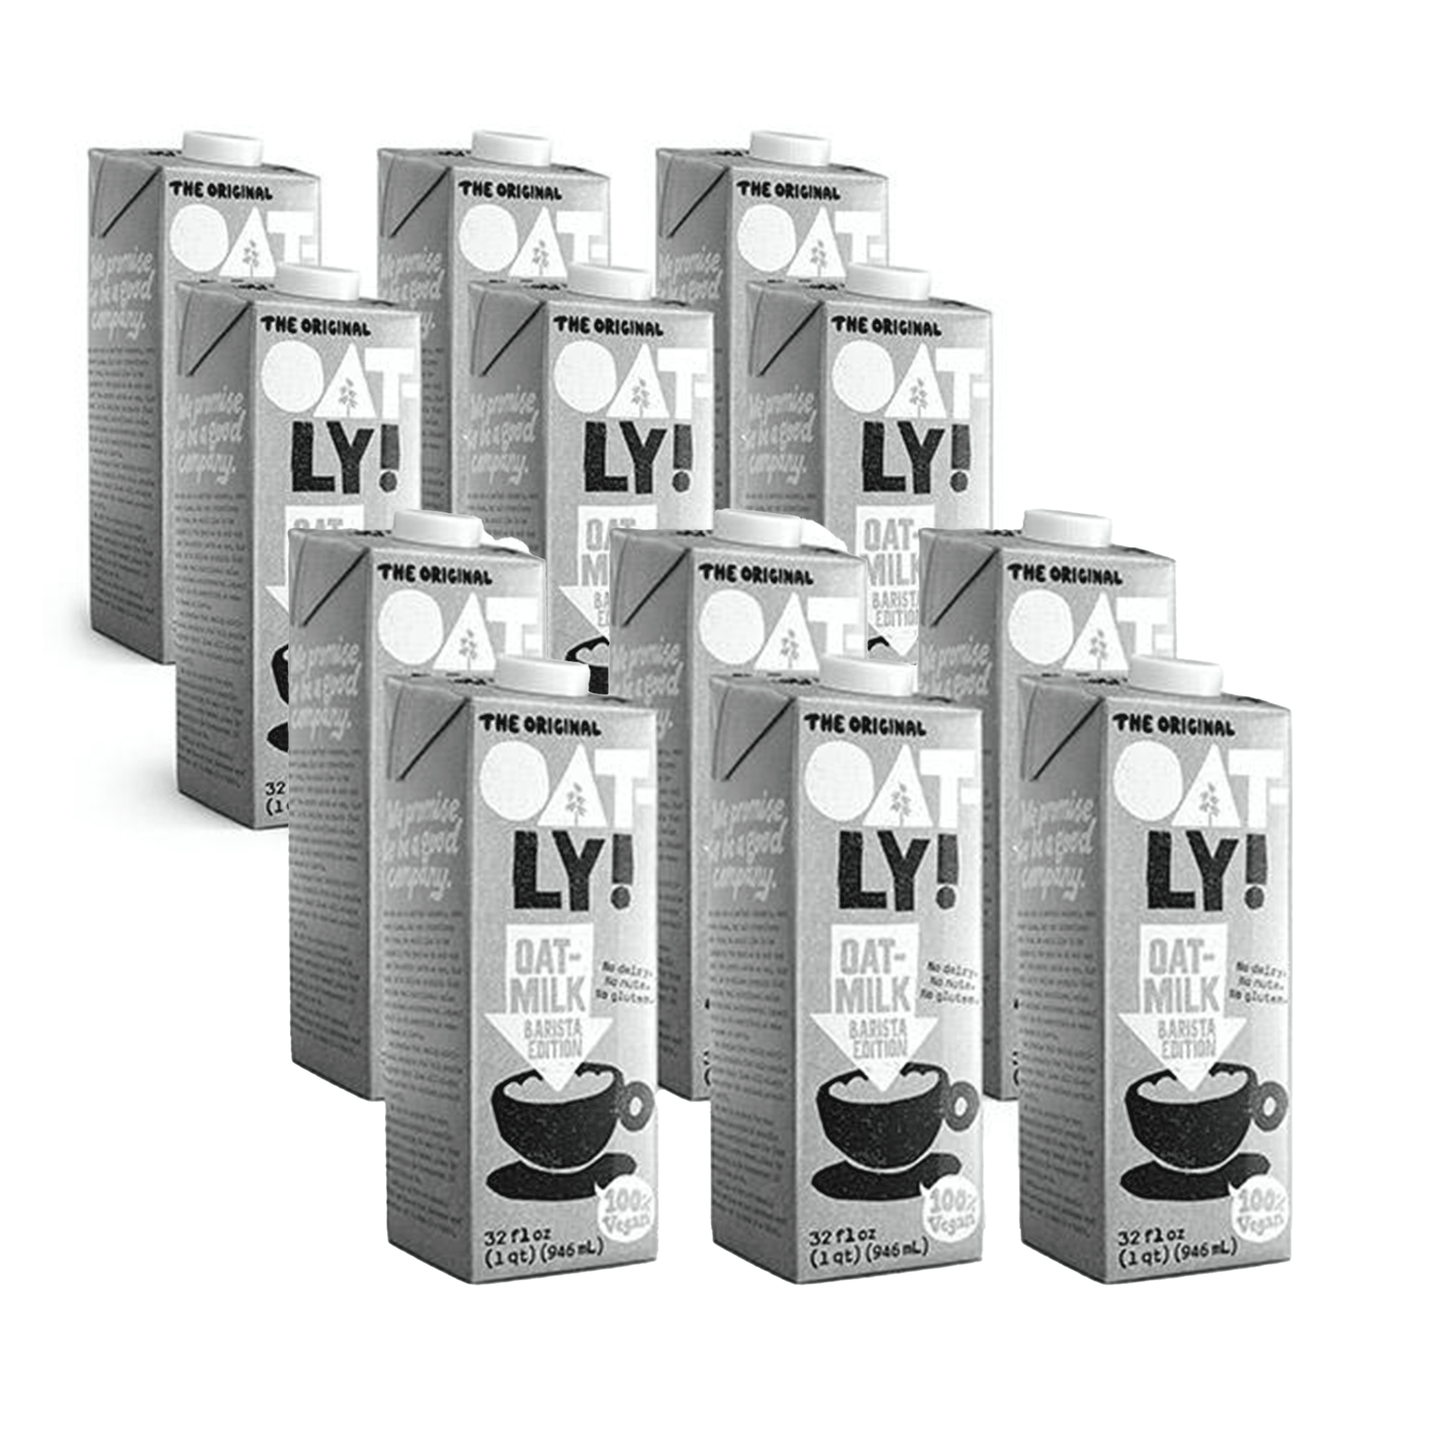 Oatly Barista Edition Now Available at The Coffee Bean & Tea Leaf